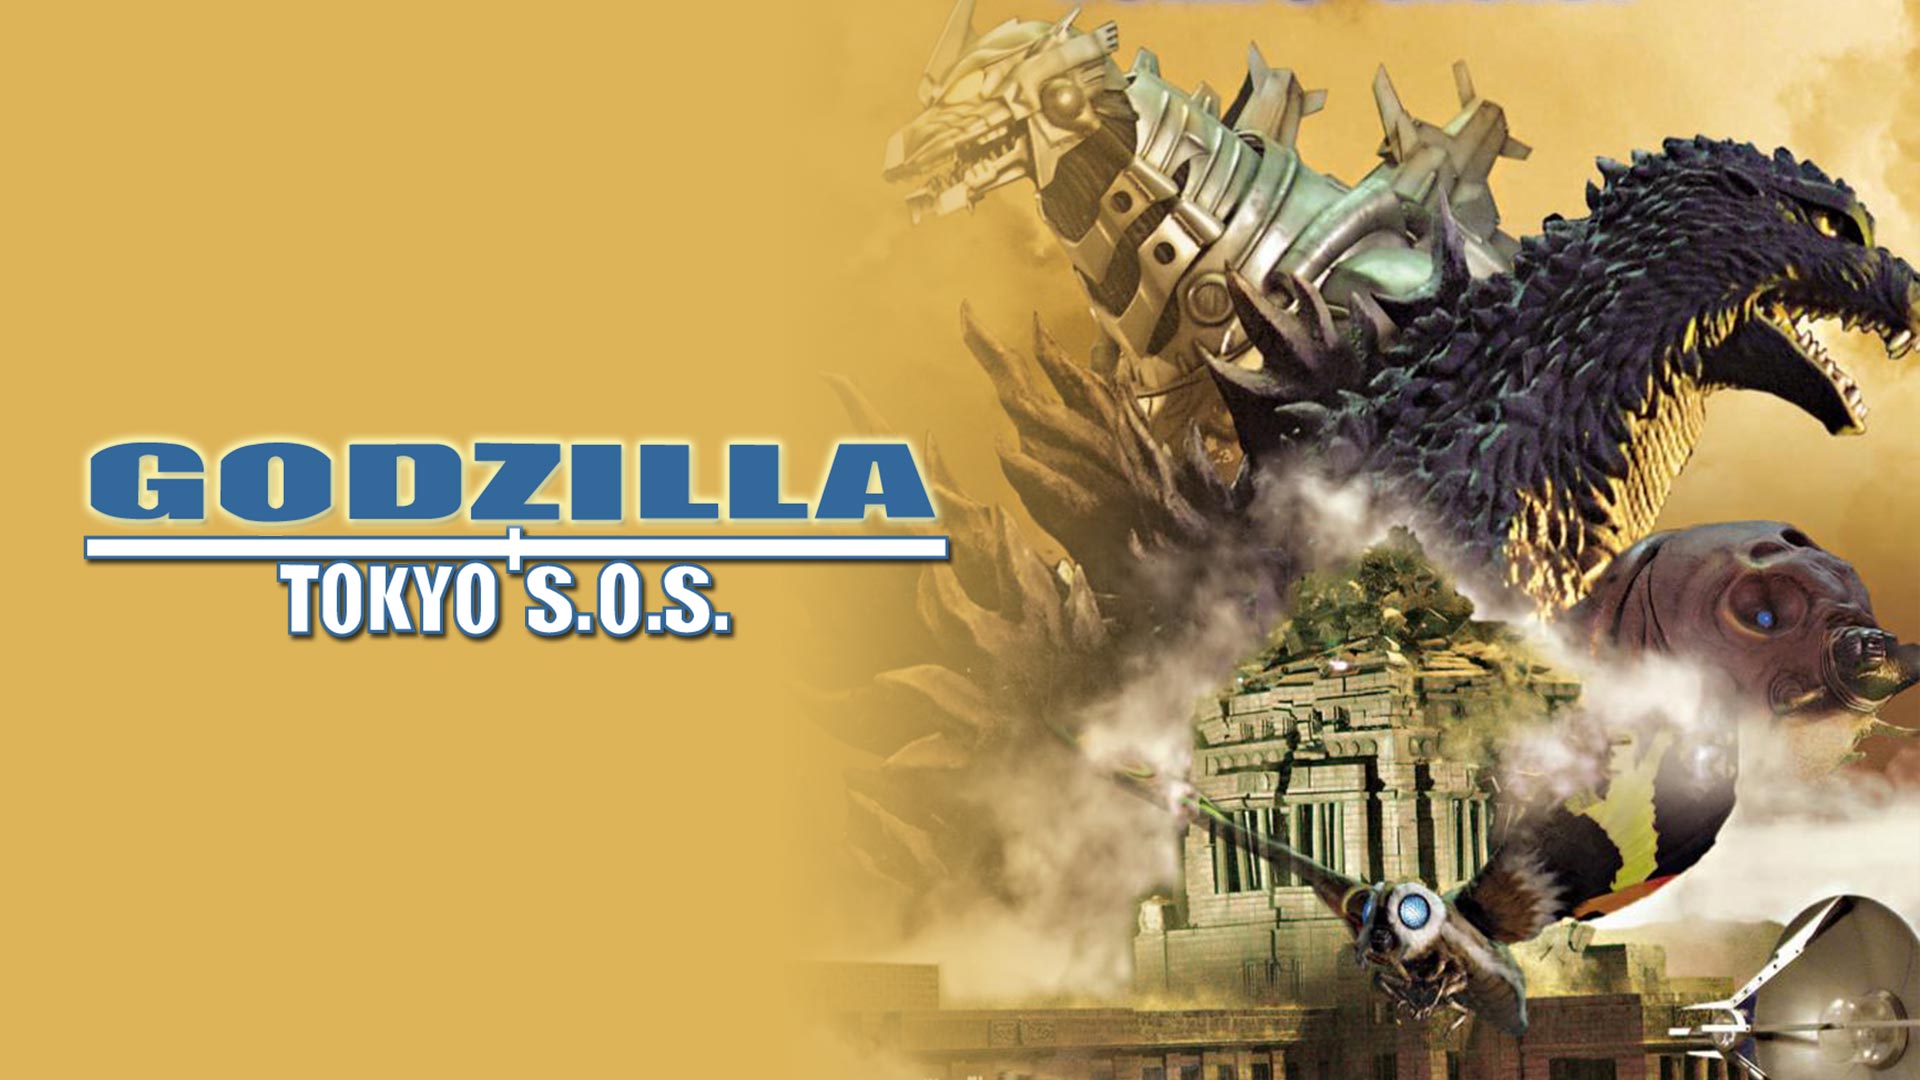 39-facts-about-the-movie-godzilla-tokyo-s-o-s